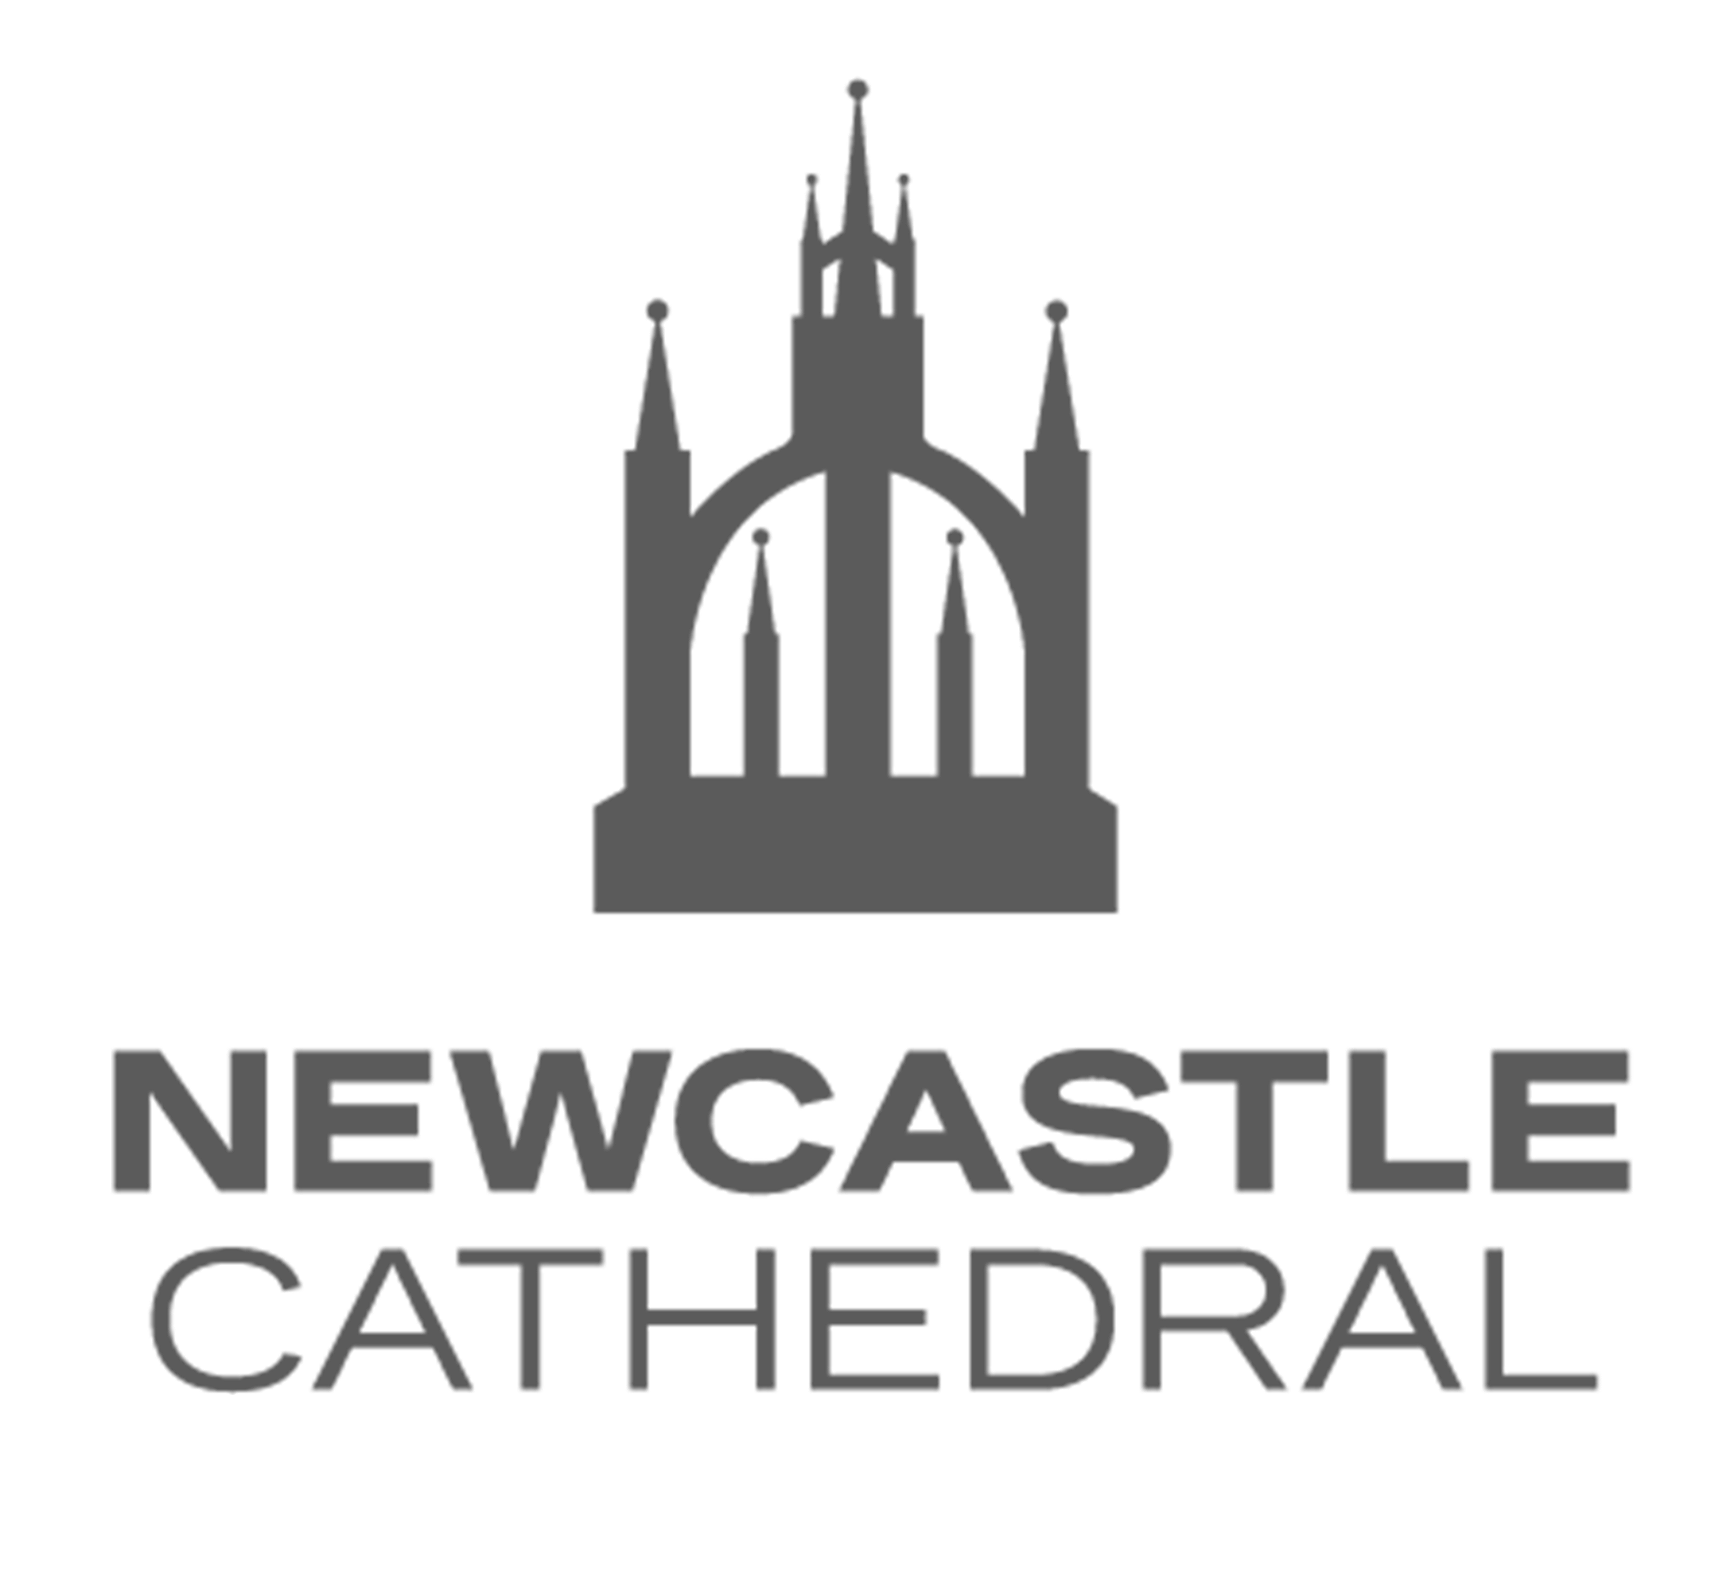 Newcastle-Cathedral-logo-002.png